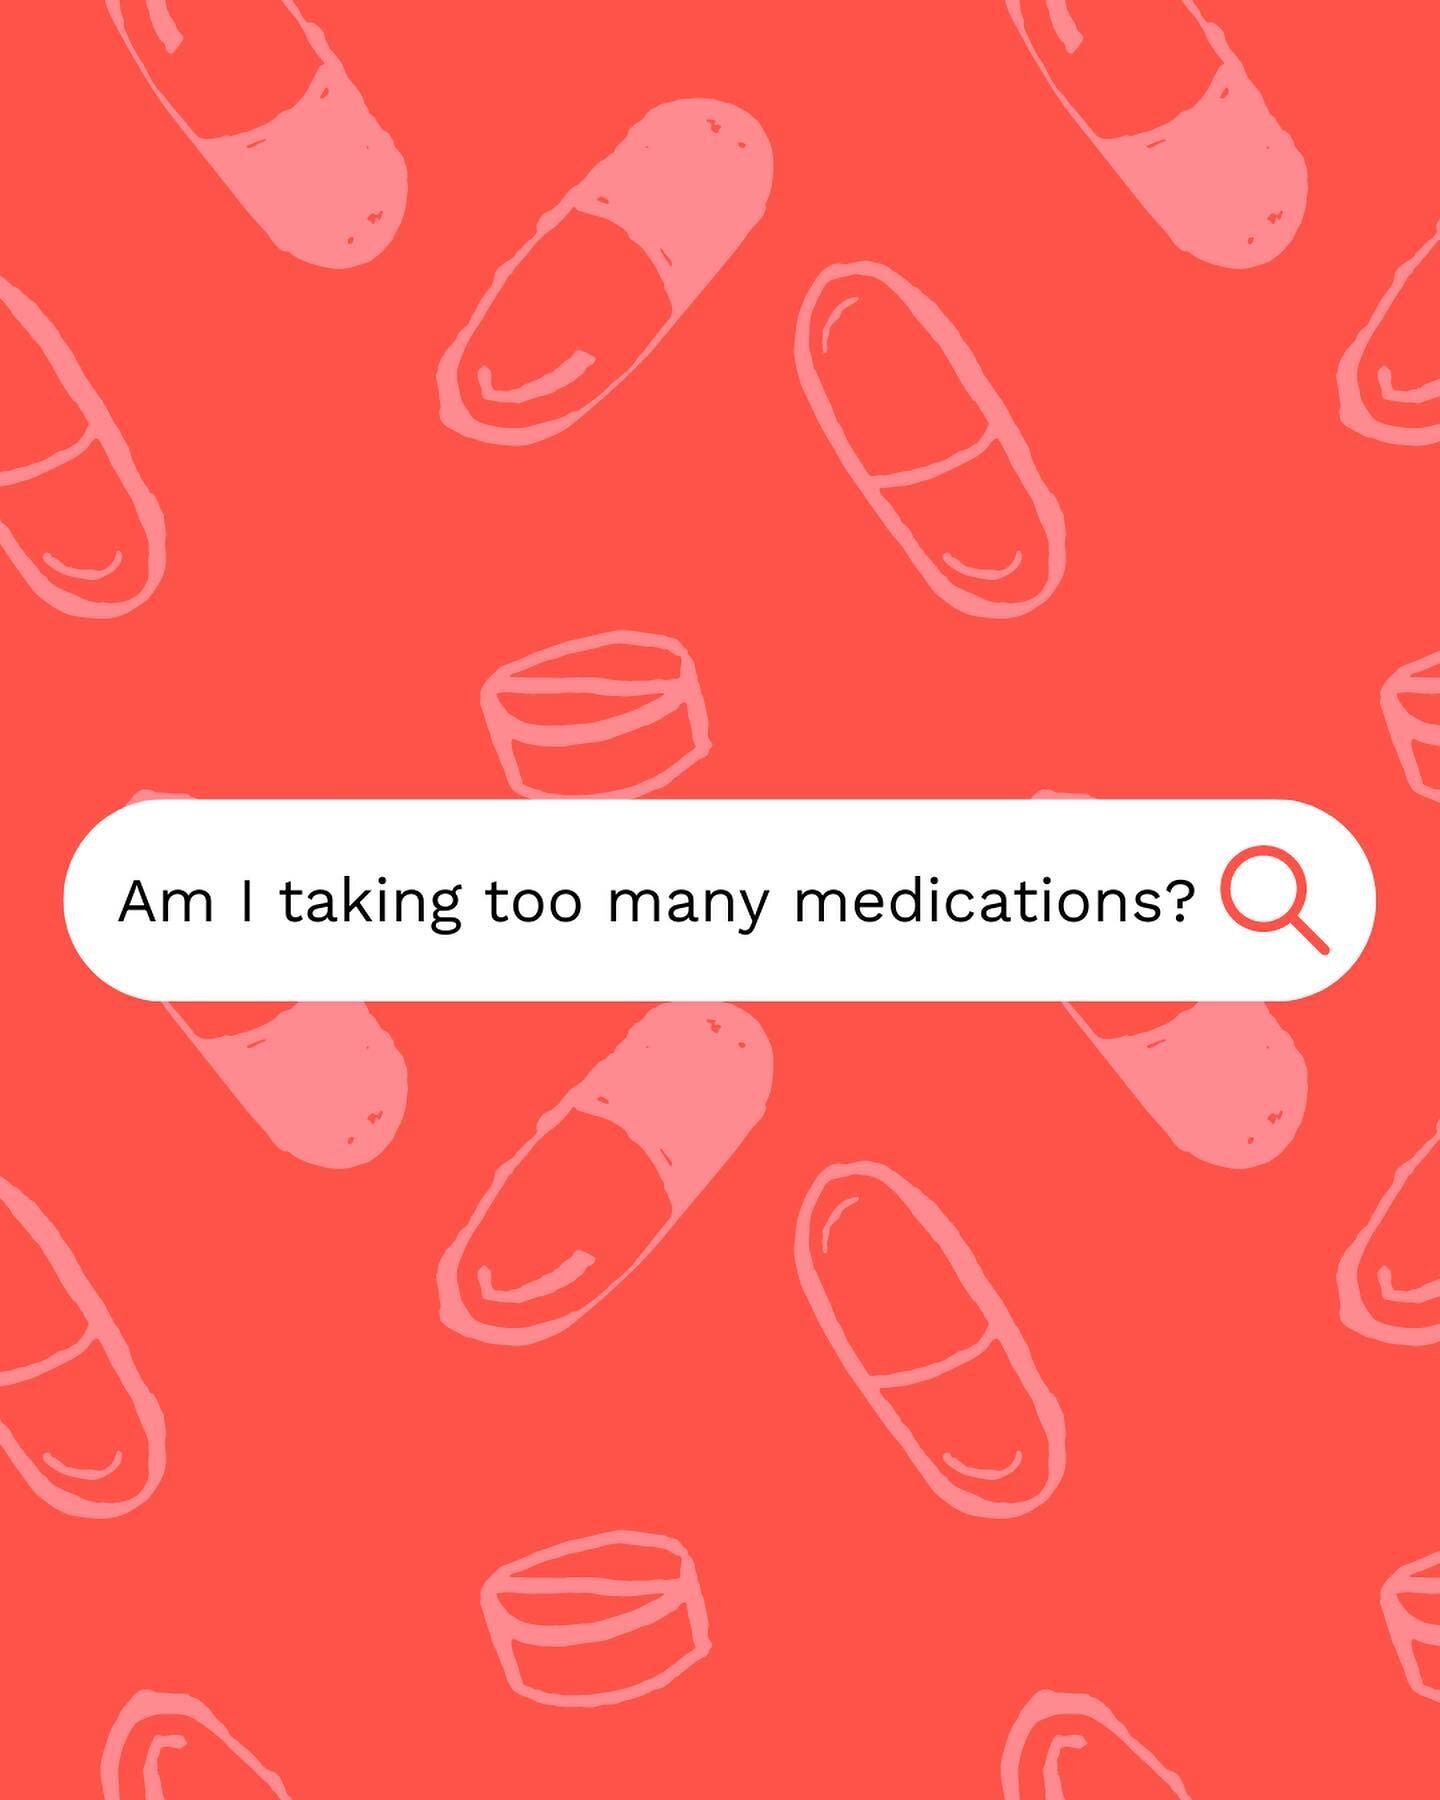 This is a question we get A LOT. For anyone who feels like they&rsquo;re taking a veritable pharmacy&rsquo;s worth of medication each day we hear you. If you want to know how to safely wean off medication please swipe through for @hgmoms Kimber&rsquo